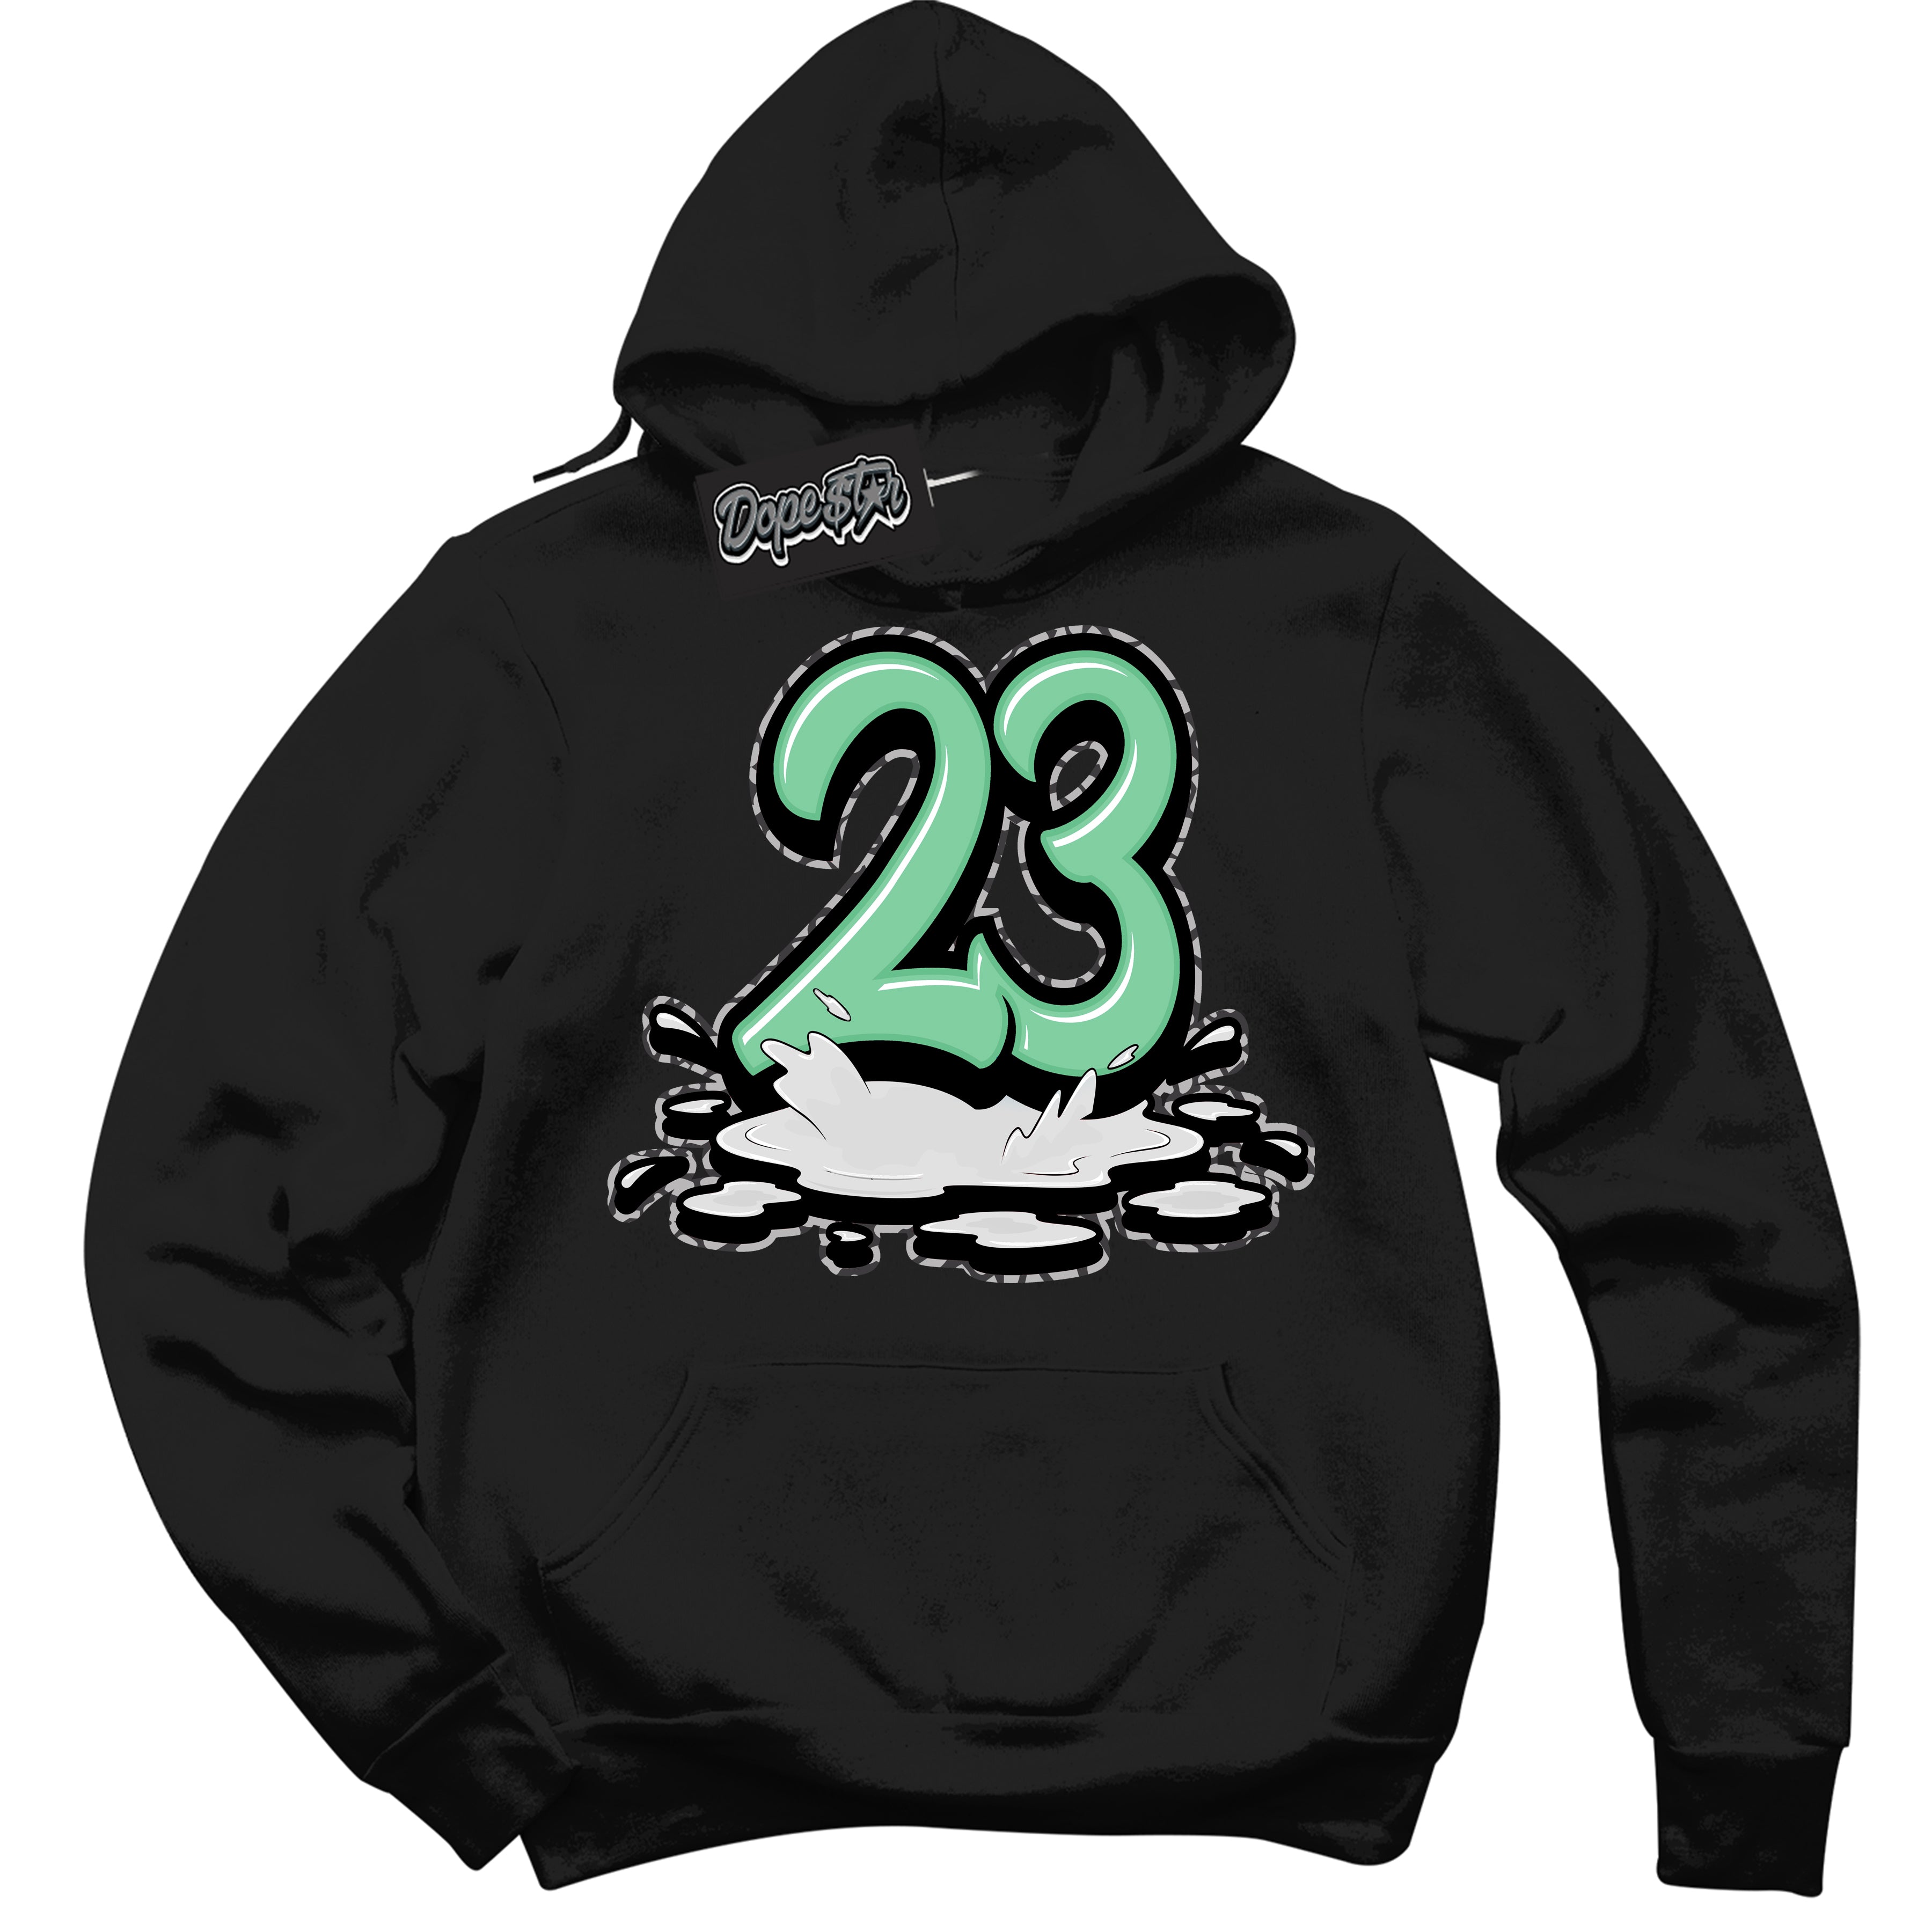 Cool Black Graphic DopeStar Hoodie with “ 23 Melting “ print, that perfectly matches Green Glow 3S sneakers